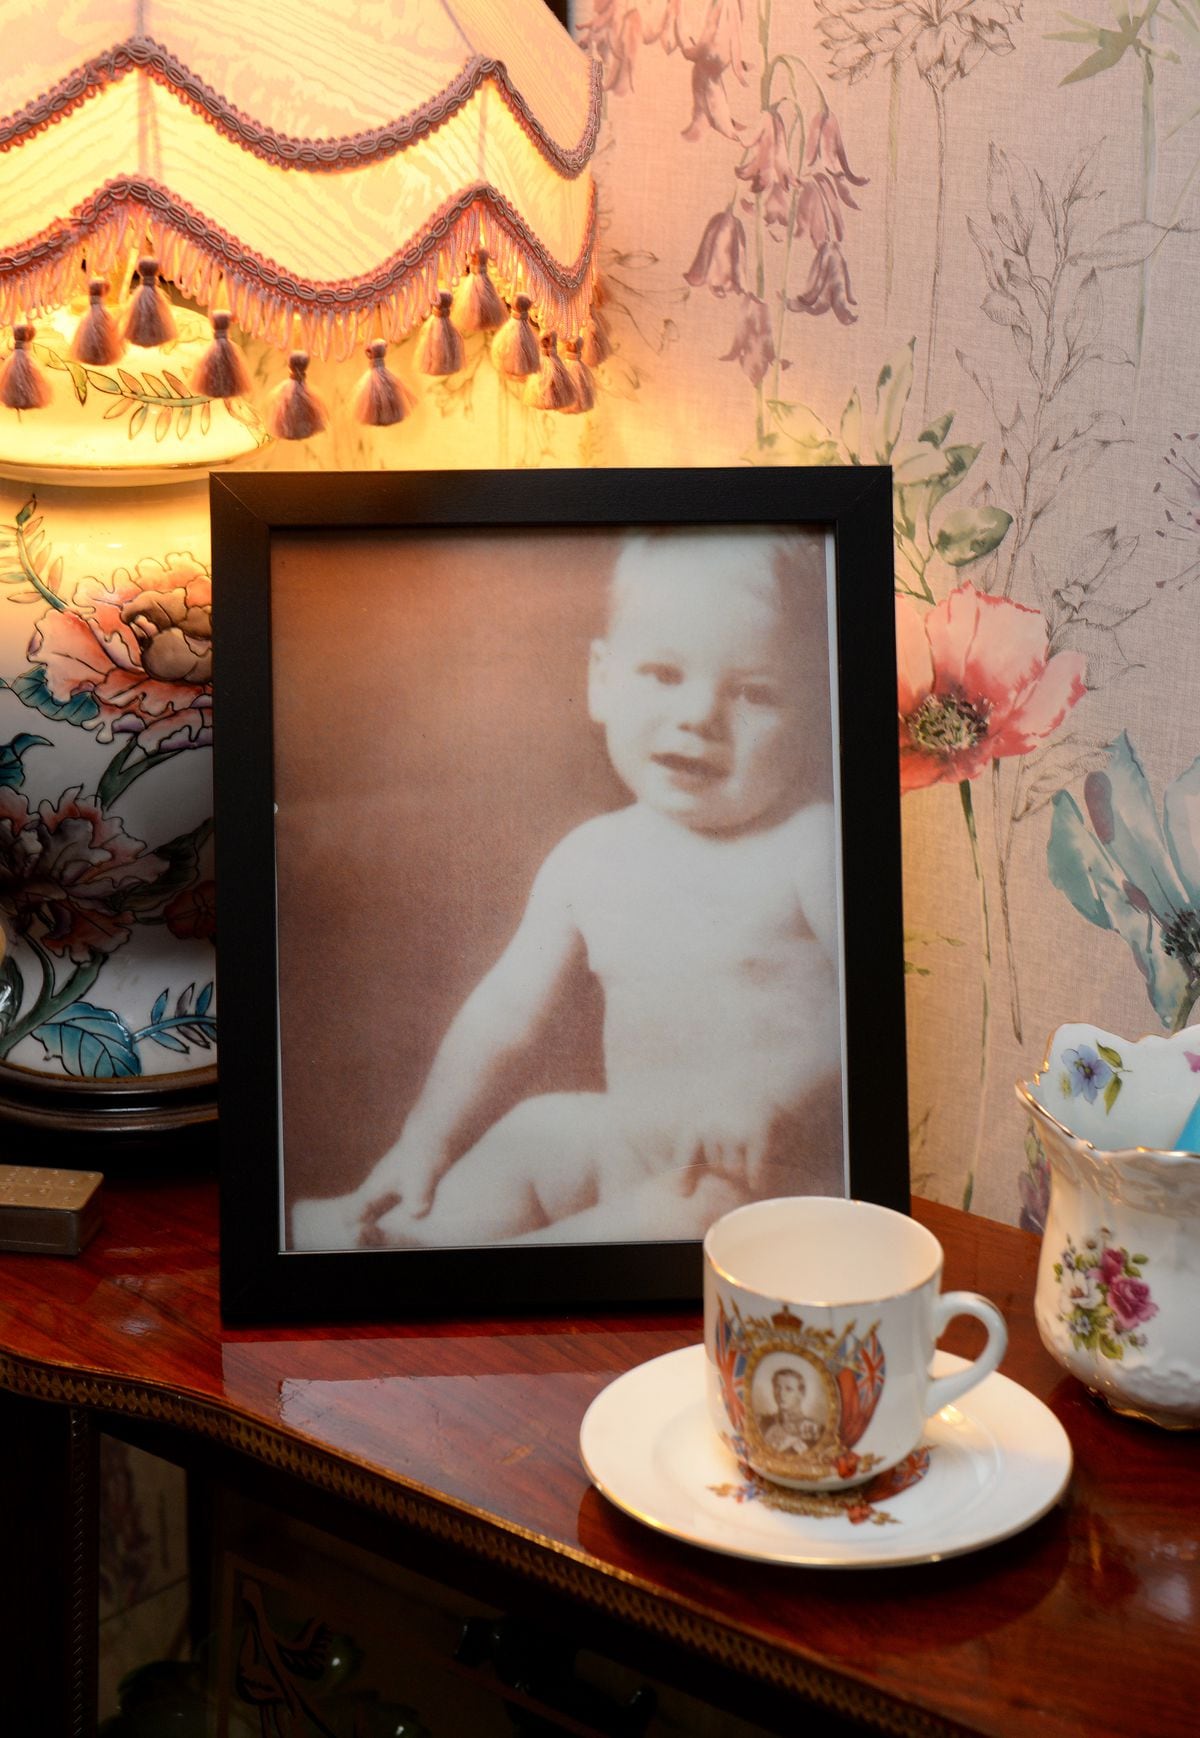  A picture of Duncan as a baby on the mantelpiece